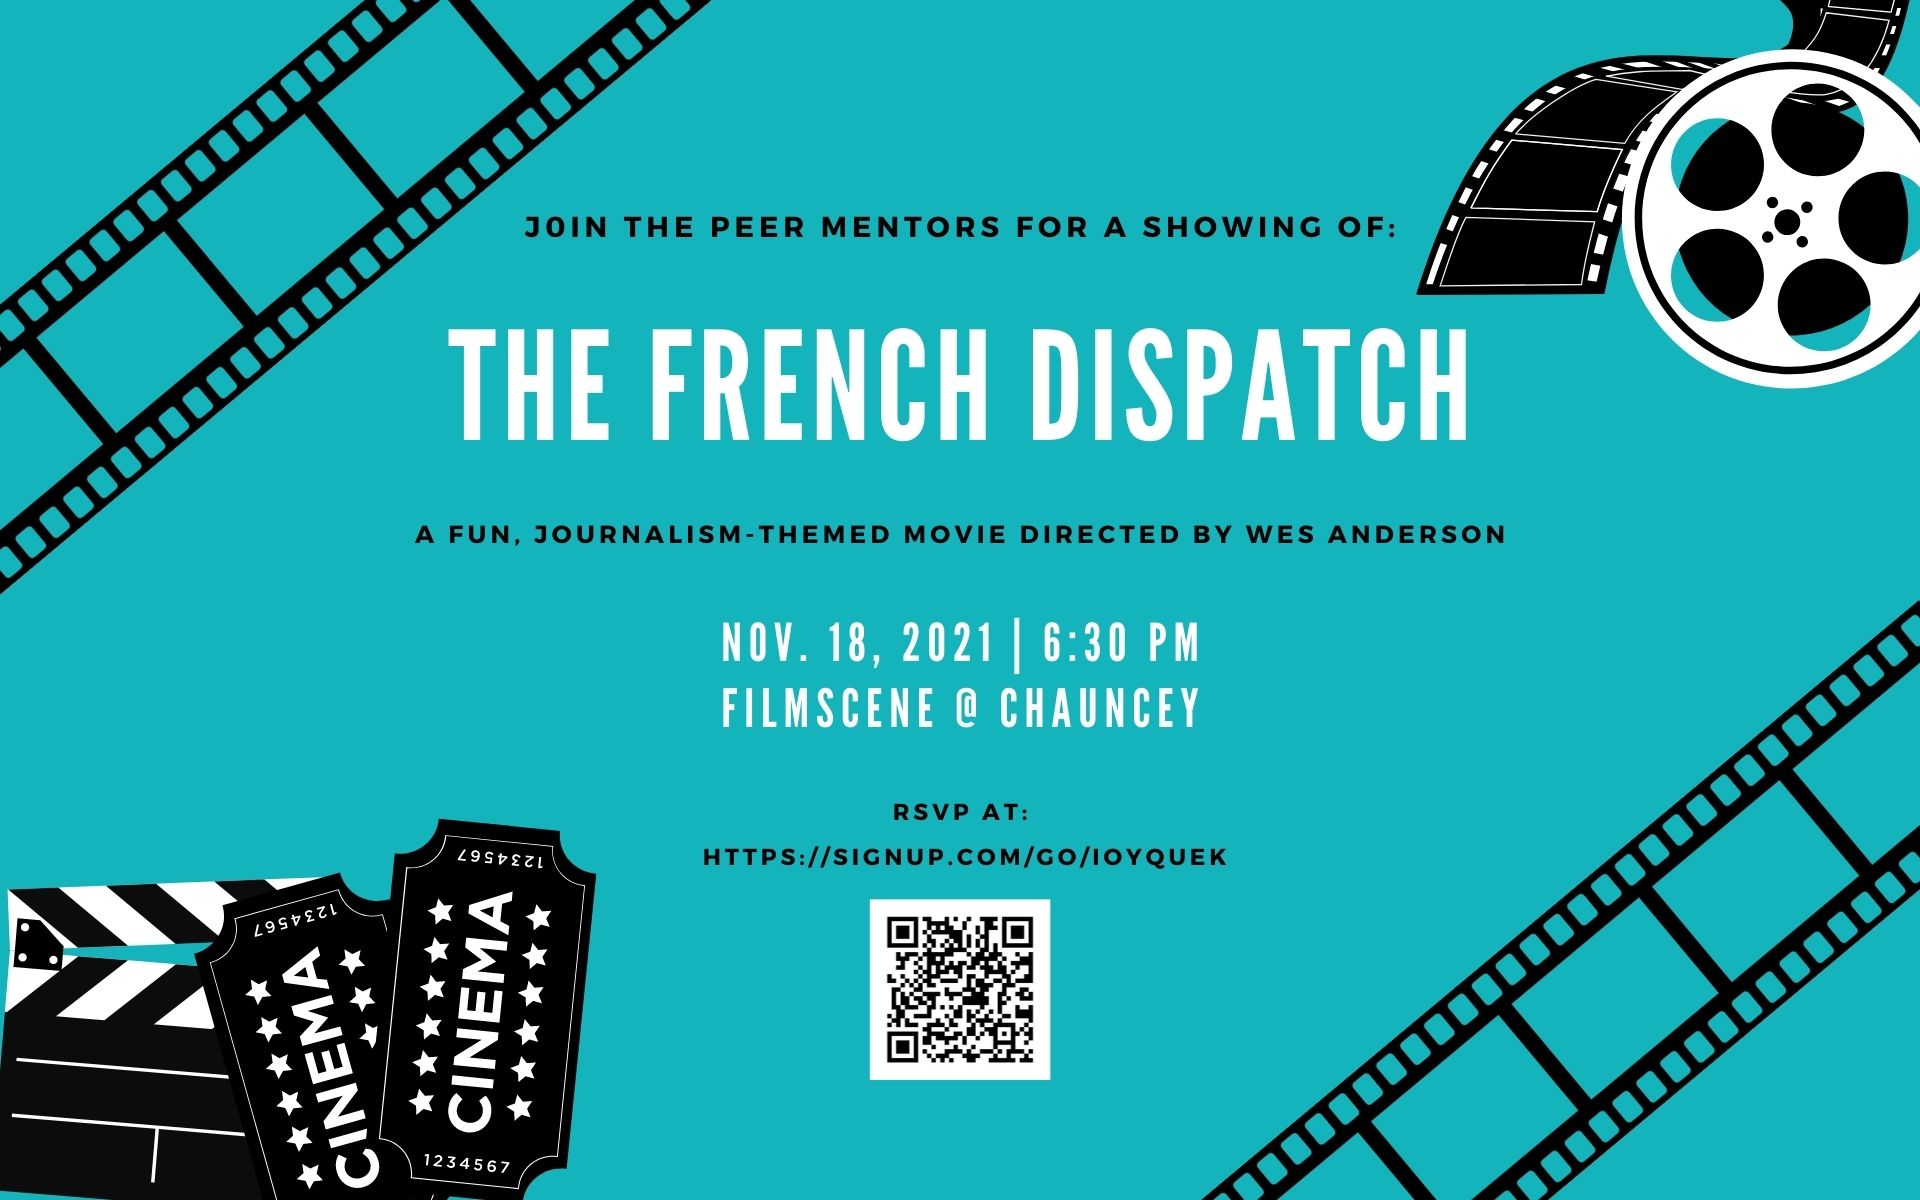 SJMC Mentors invite you to a screening of The French Dispatch at FIlmscene